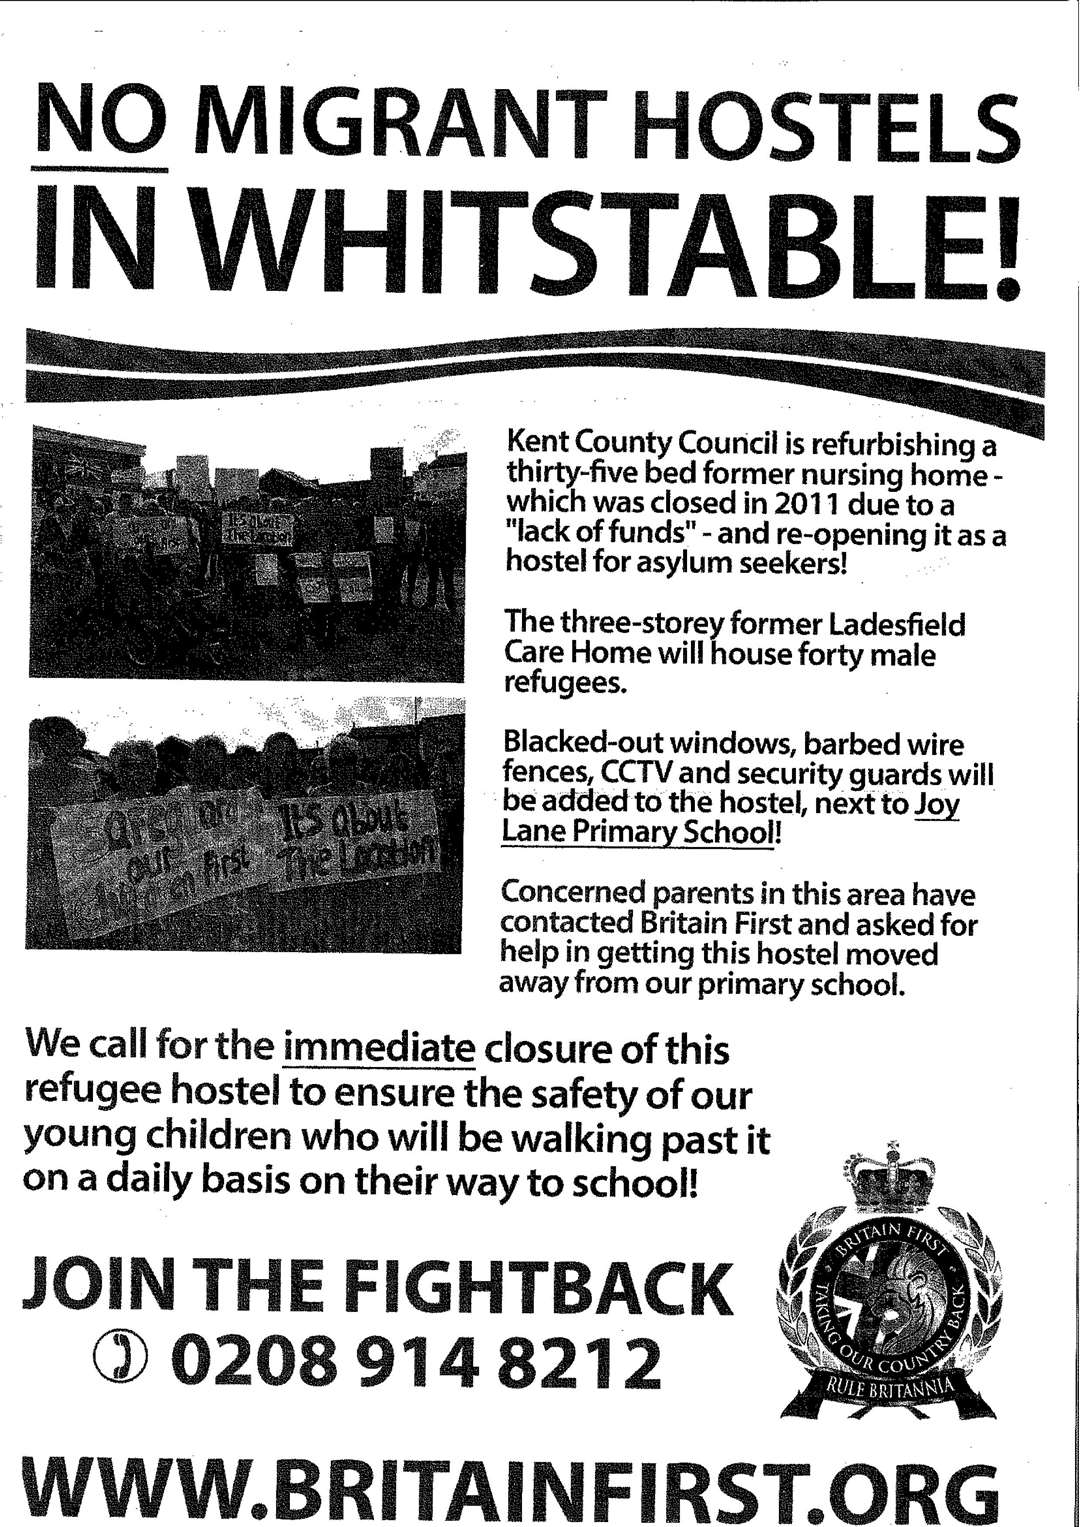 Britain First handed this leaflet out in Whitstable at the weekend